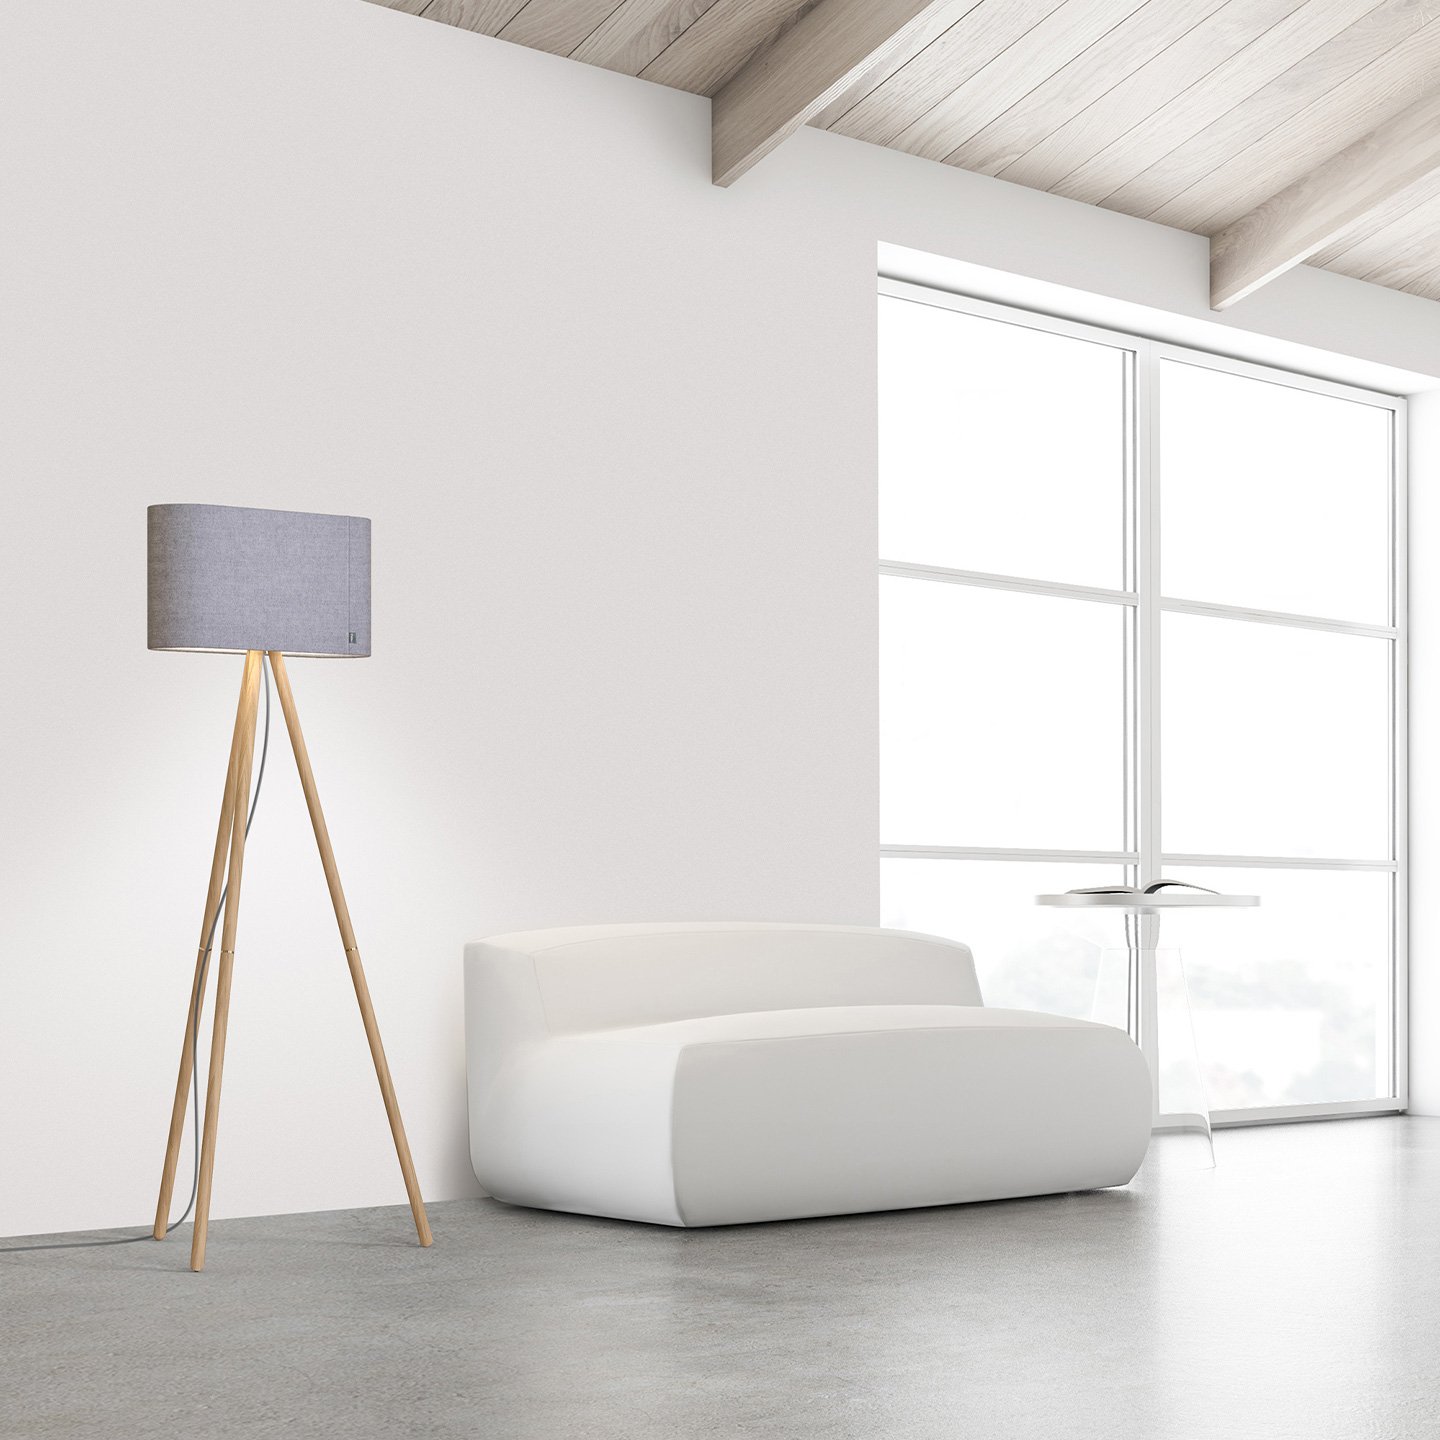 Belmont is a LED lamp that casts both direct and indirect light to bring comfortable warmth and sophistication to any social setting.